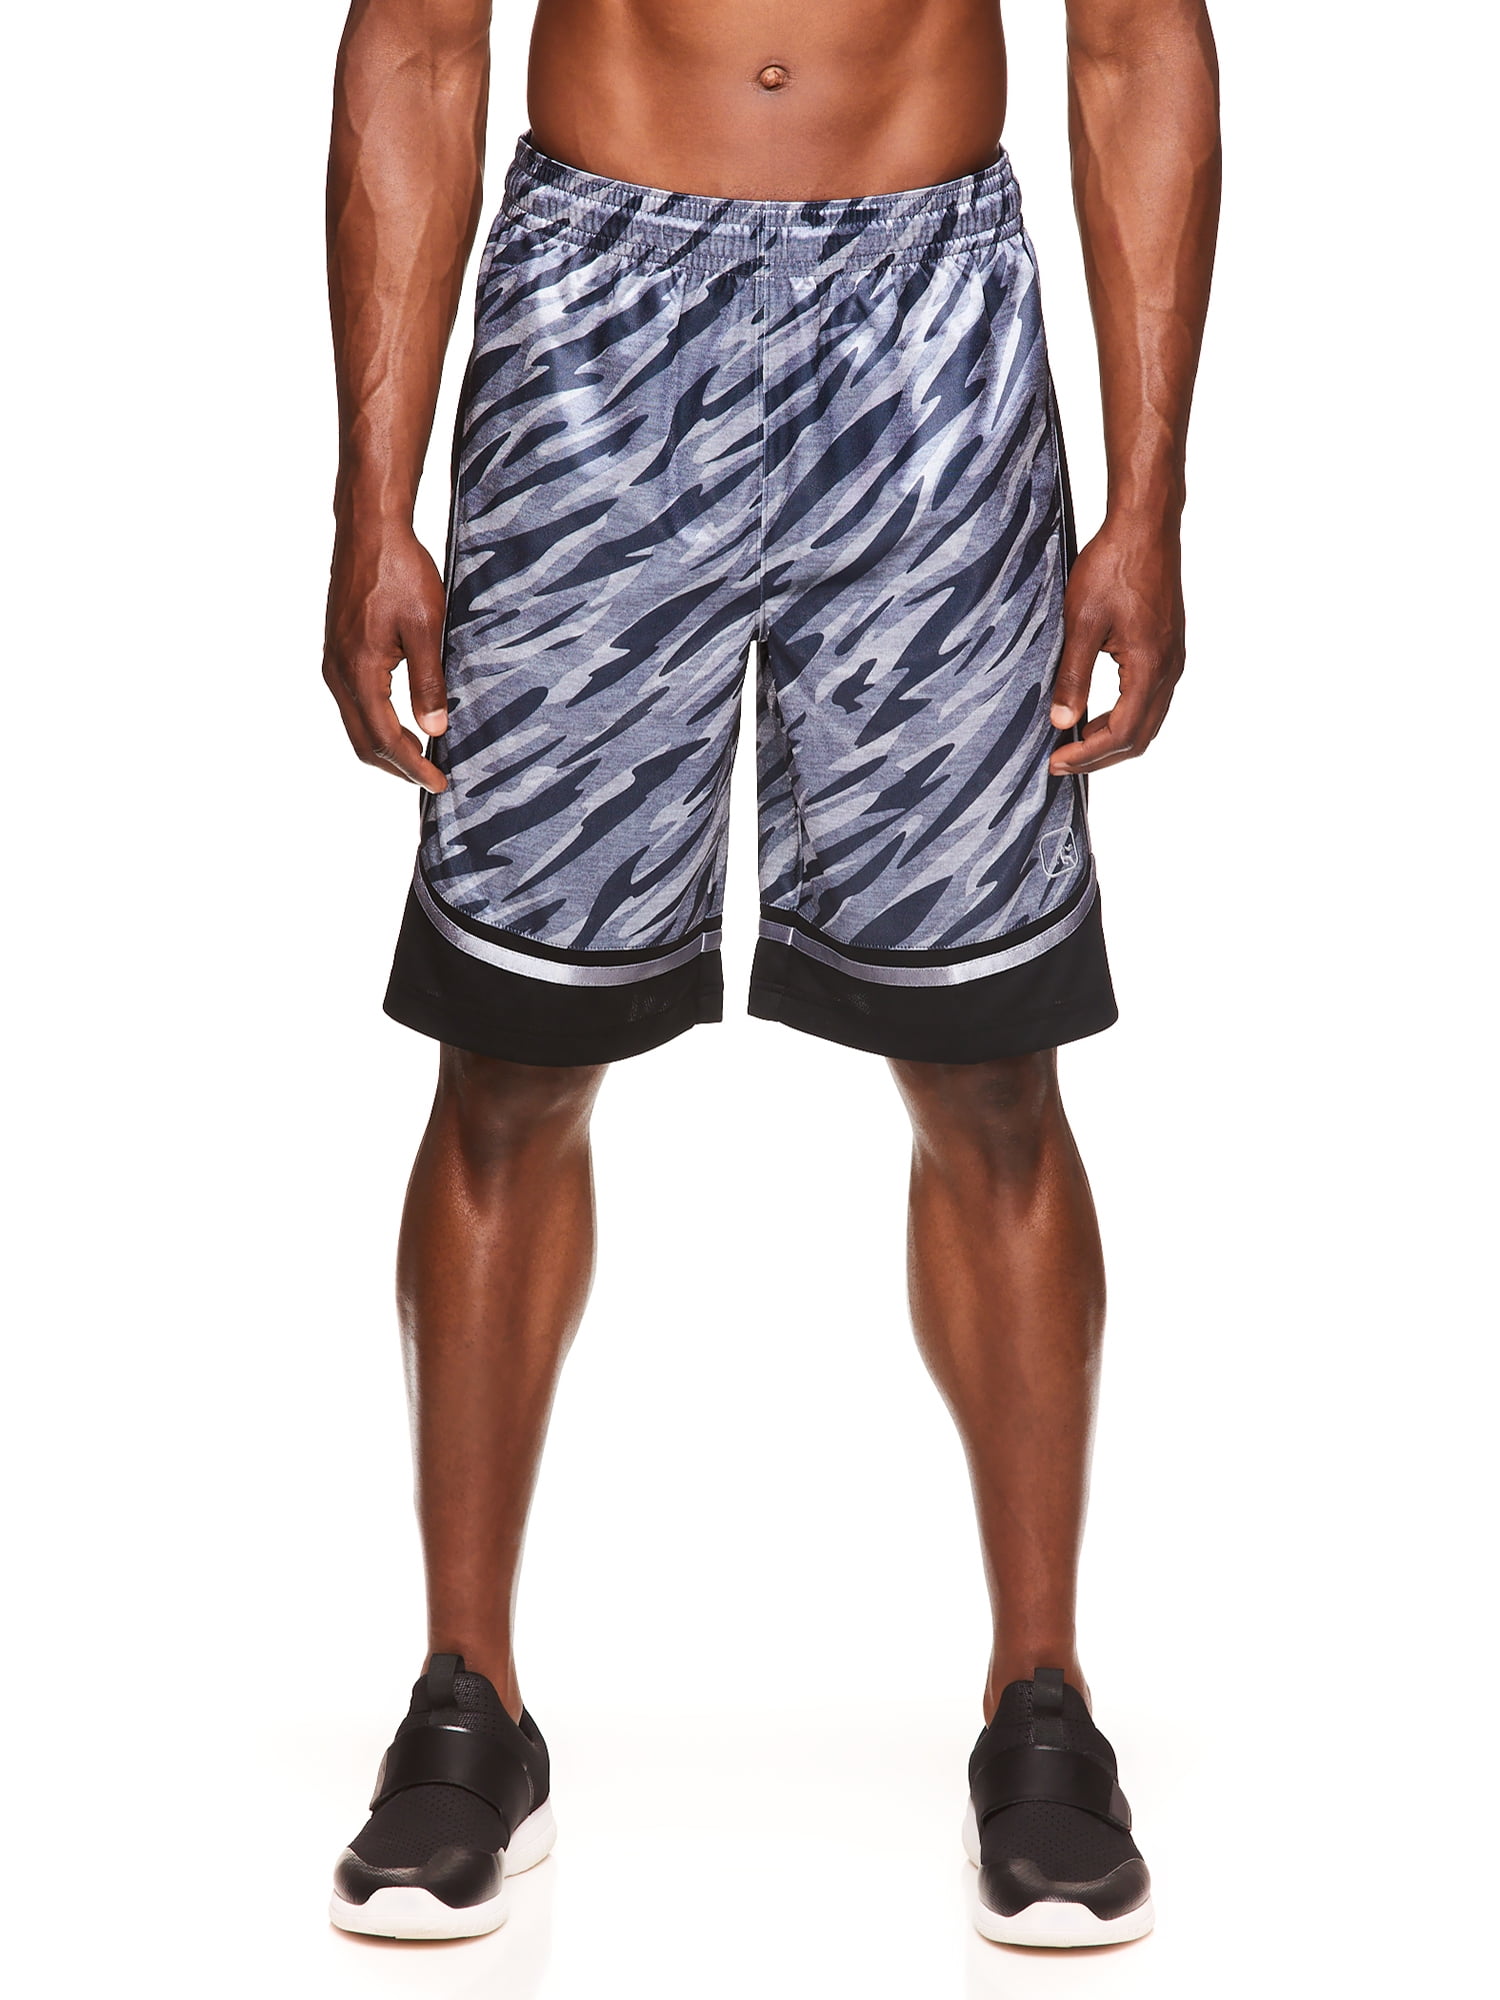 Need Bigger-Sized Basketball Shorts. Try These Top And1 Shorts in 4XL